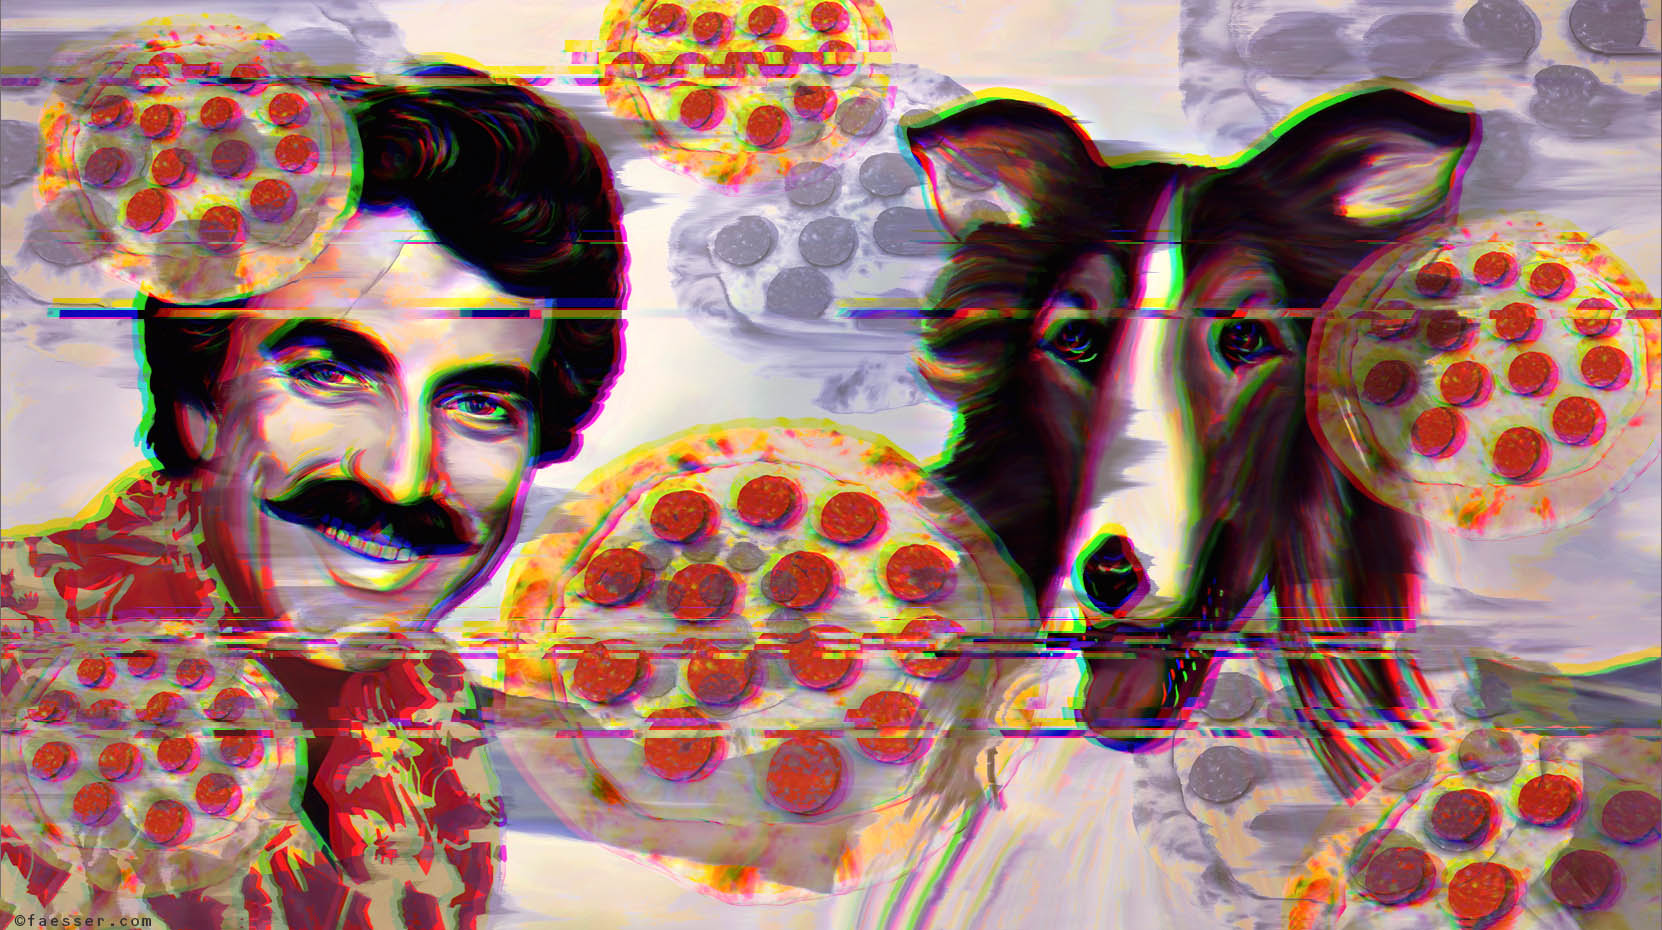 Tom Selleck and Lassie united in a pizza storm; artist Roland Faesser, sculptor and painter 2021